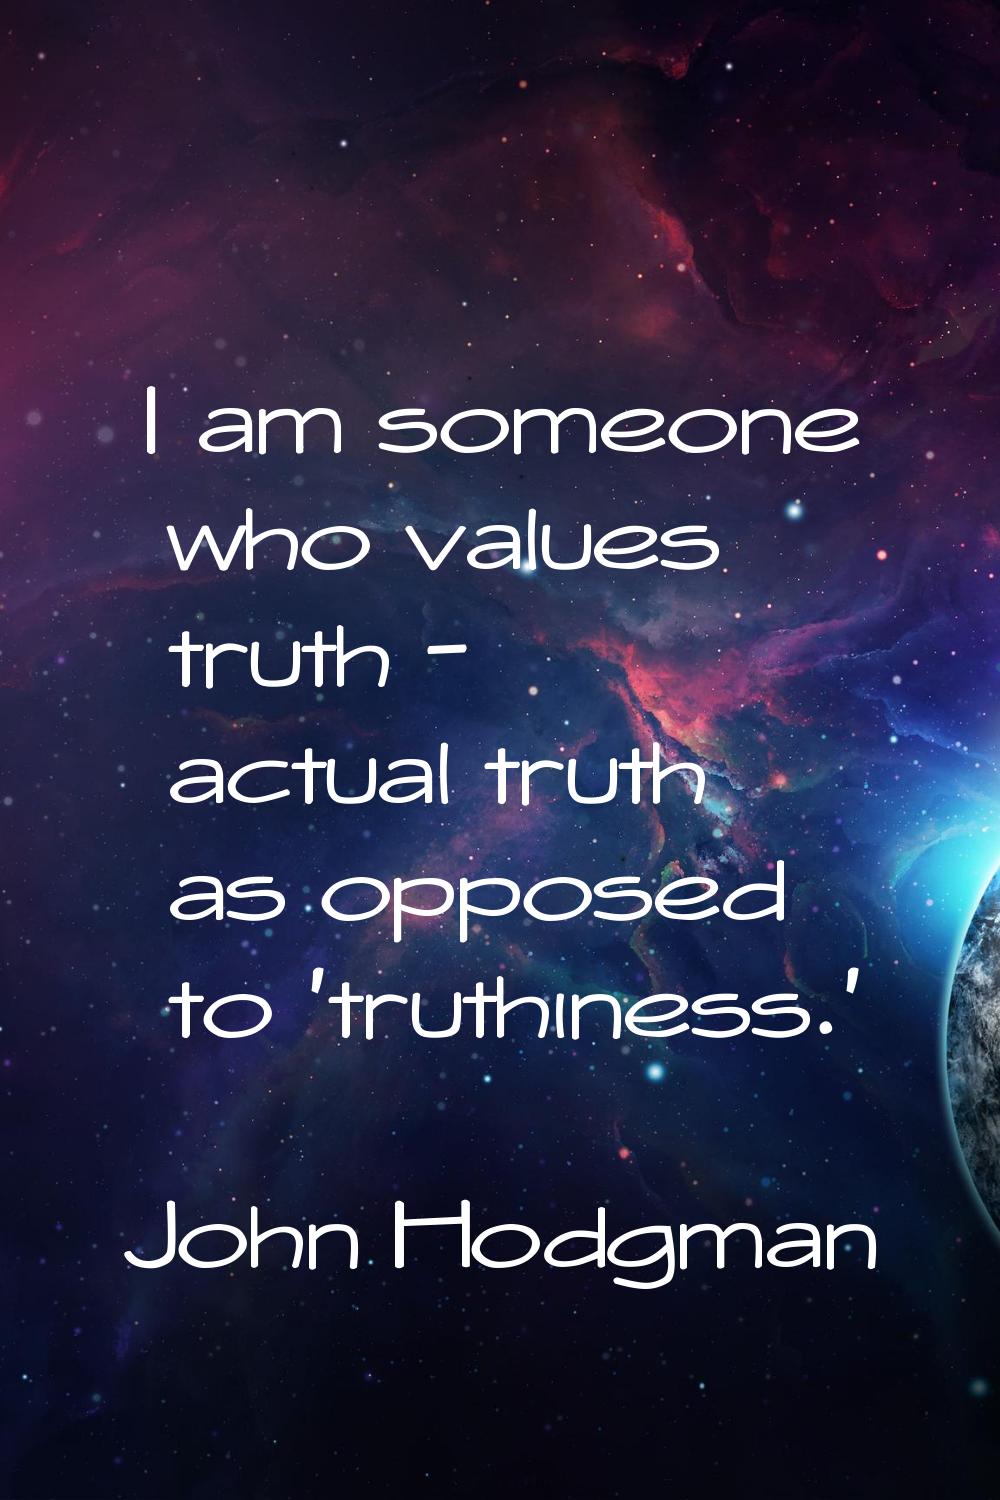 I am someone who values truth - actual truth as opposed to 'truthiness.'